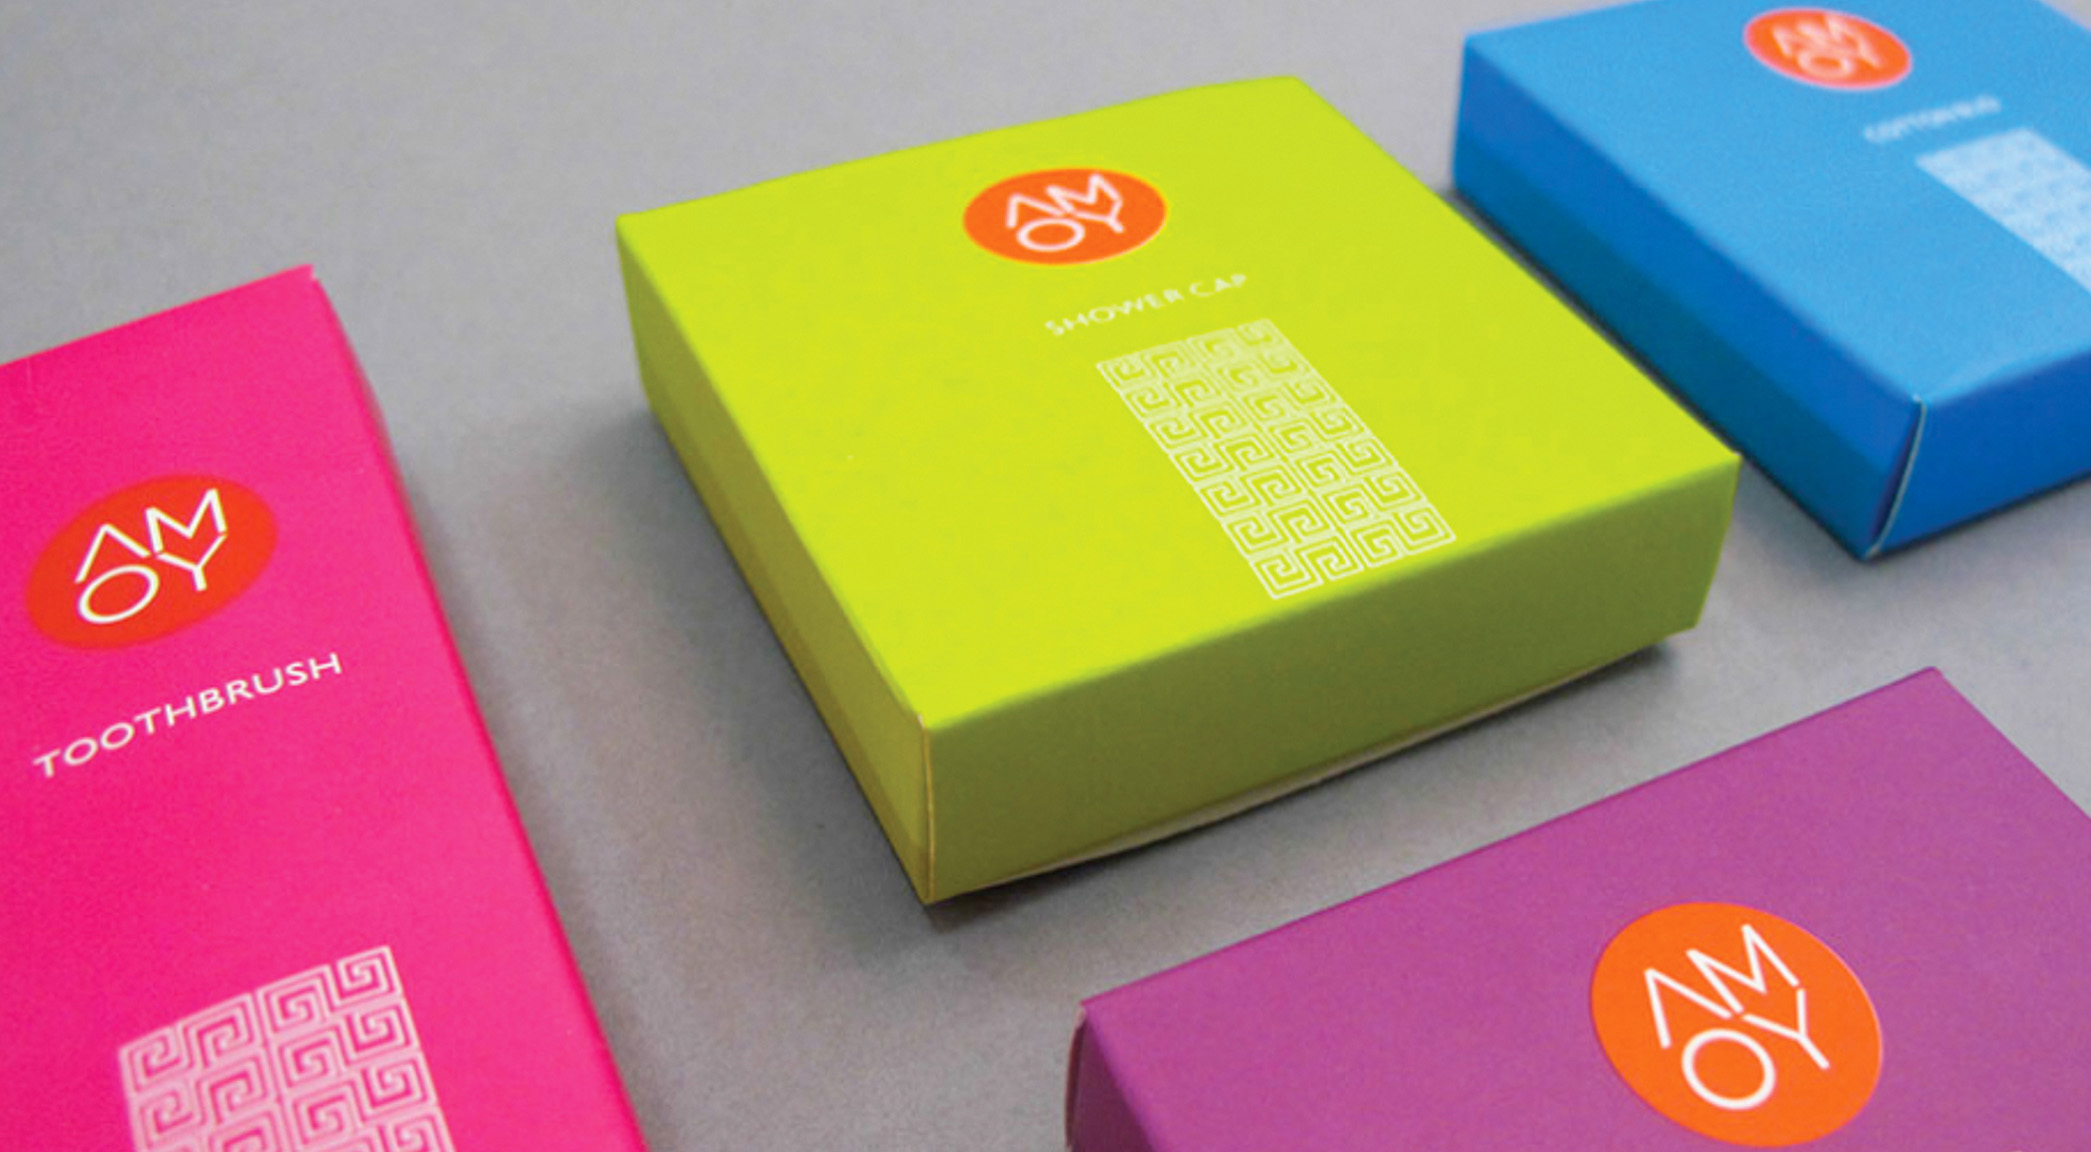 Image showing a logo on a box as a sample of work done in visual identity, design and branding, by the SmartCuts Creative Agency studio in Lausanne and Geneva, Switzerland for the purposes of creative communication.